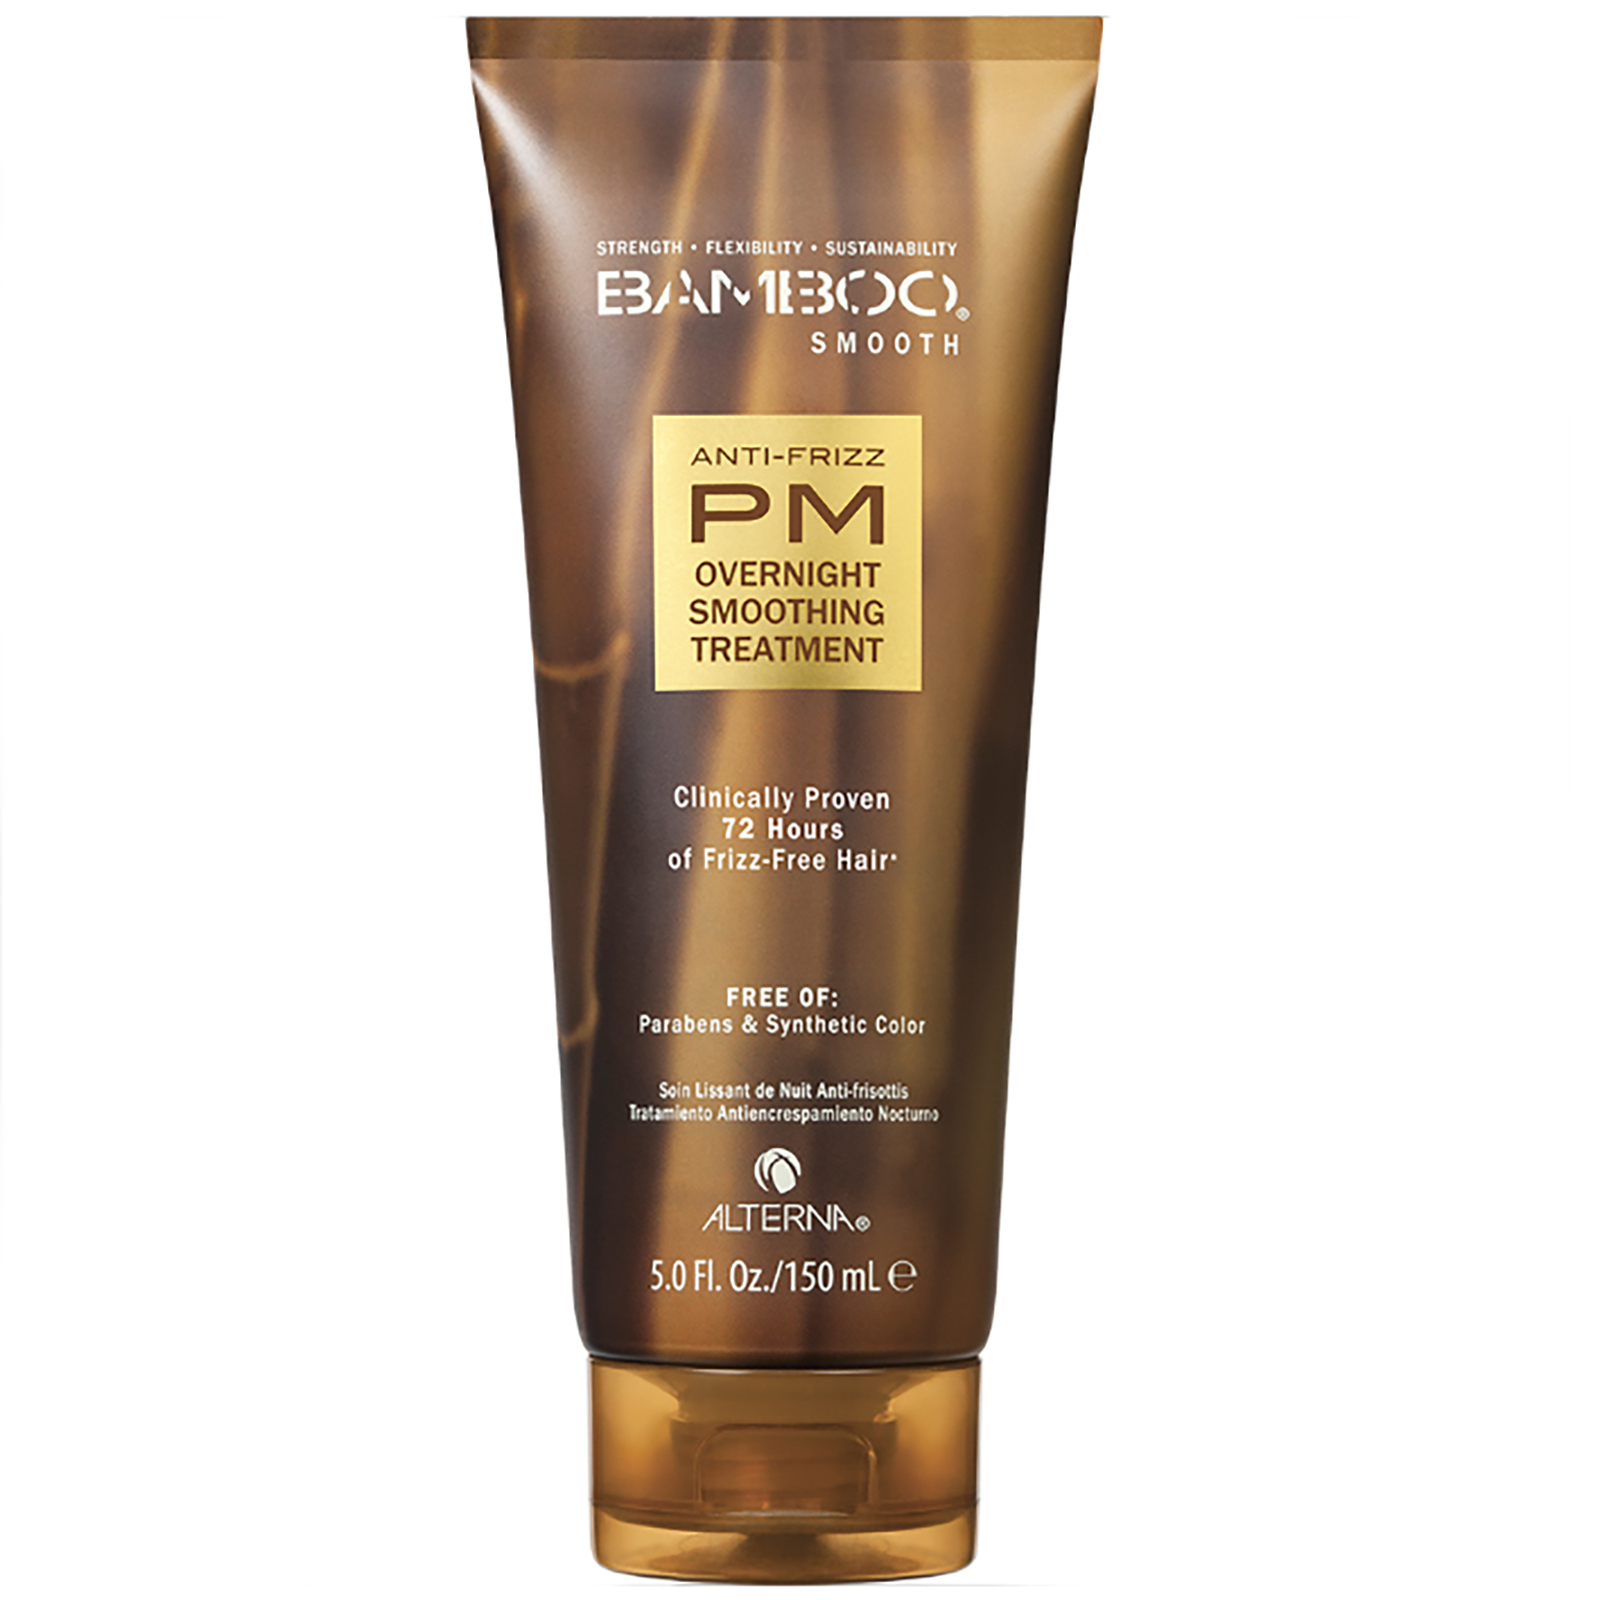 Alterna Bamboo Smooth Anti-Frizz PM Overnight Smoothing Treatment (150ml)